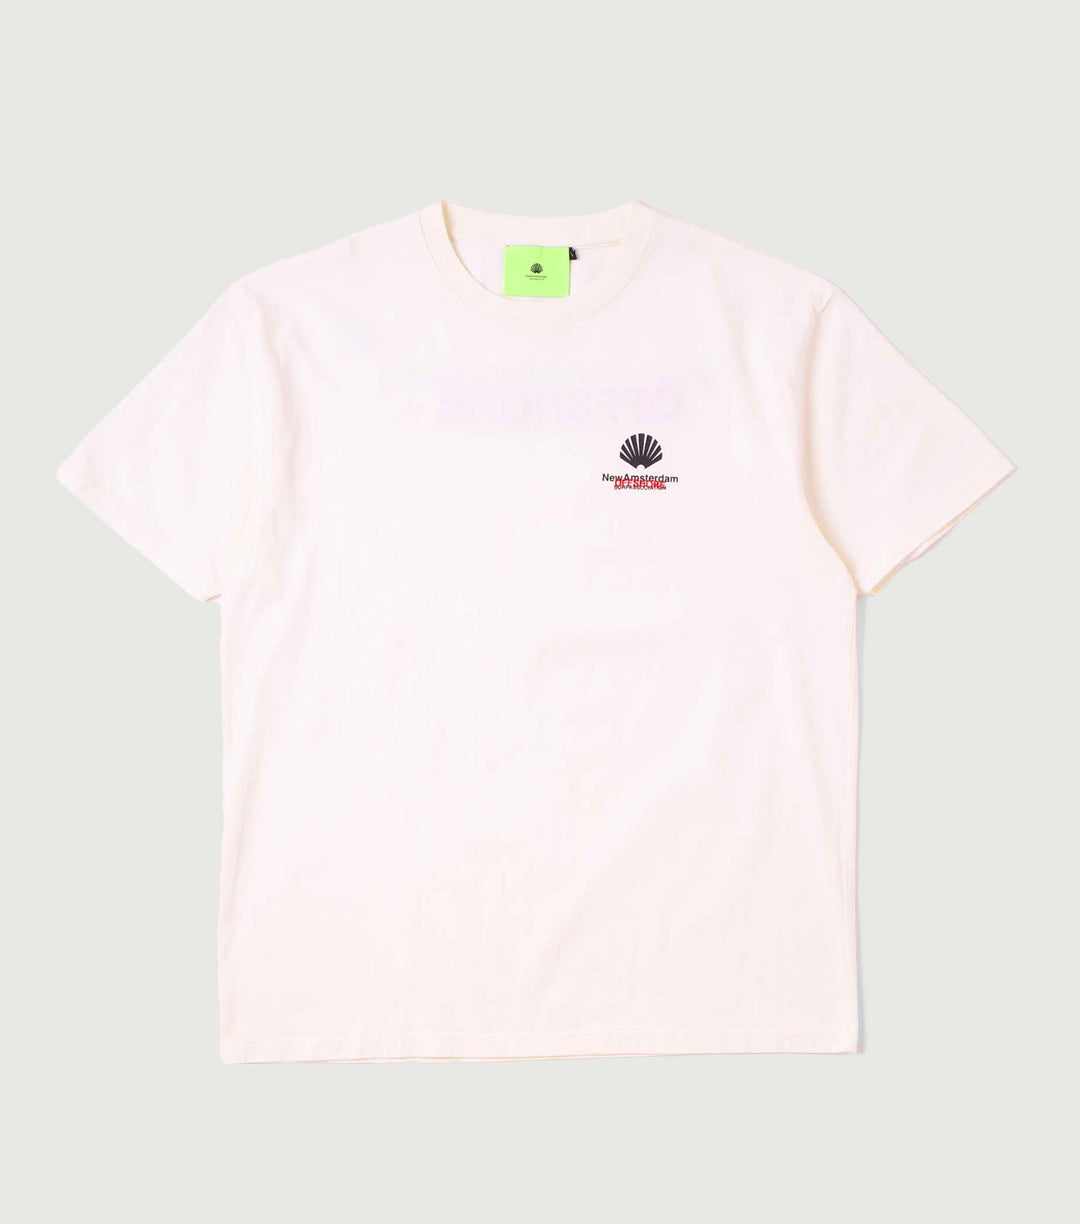 Logo Offshore Tee off-white - New Amsterdam Surf Association